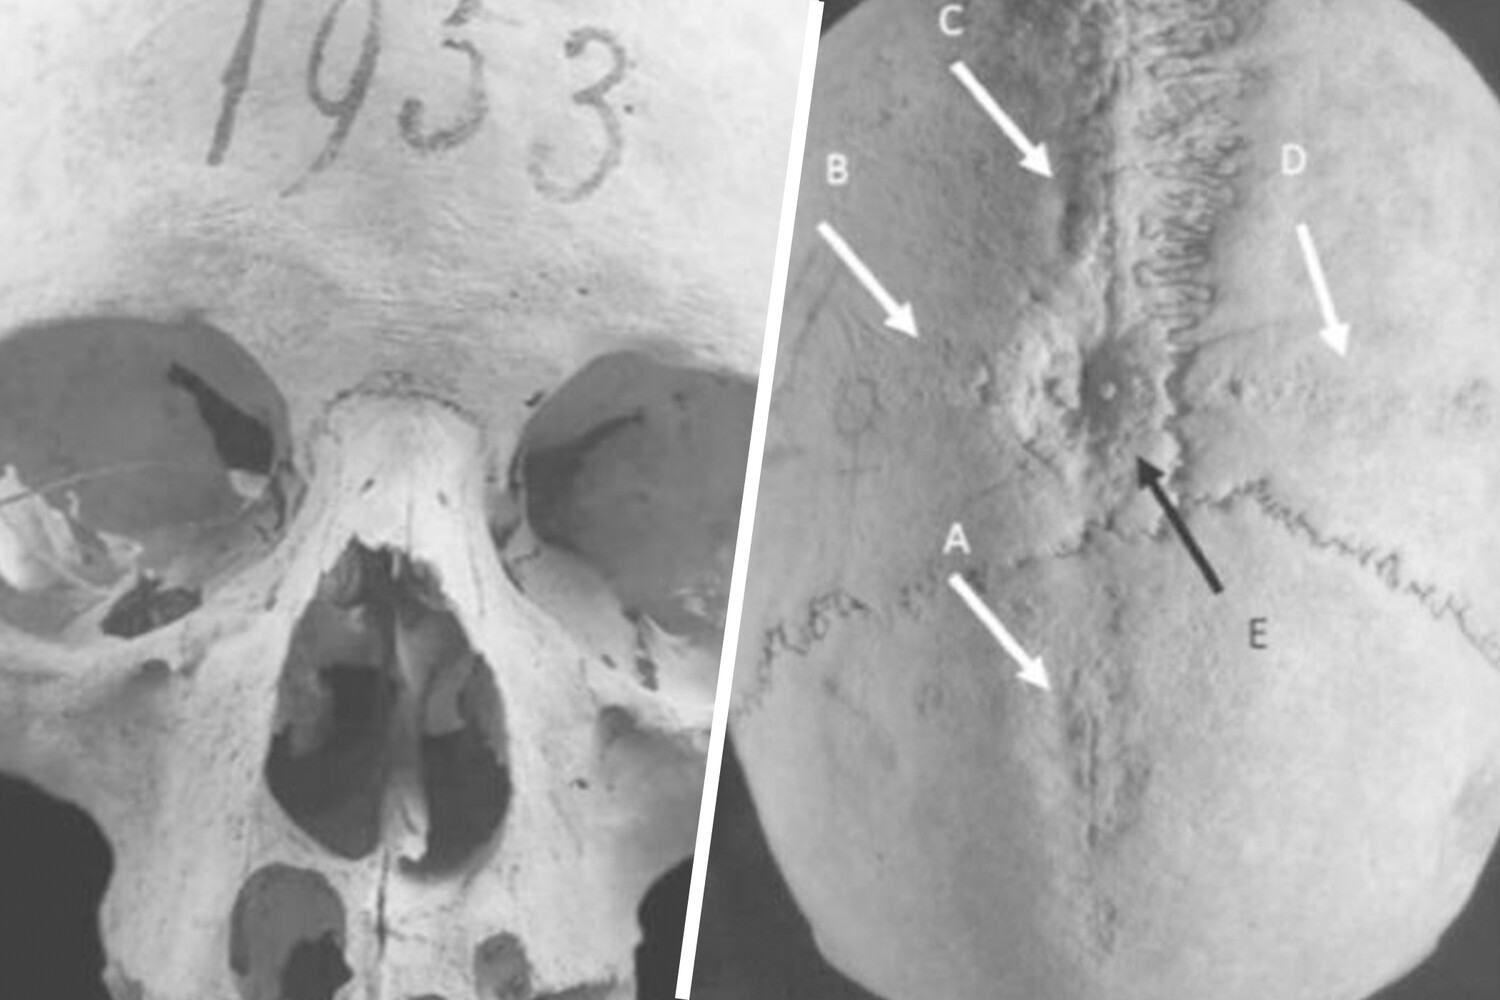 Archaeologists have discovered traces of trepanation on the skull of a medieval woman